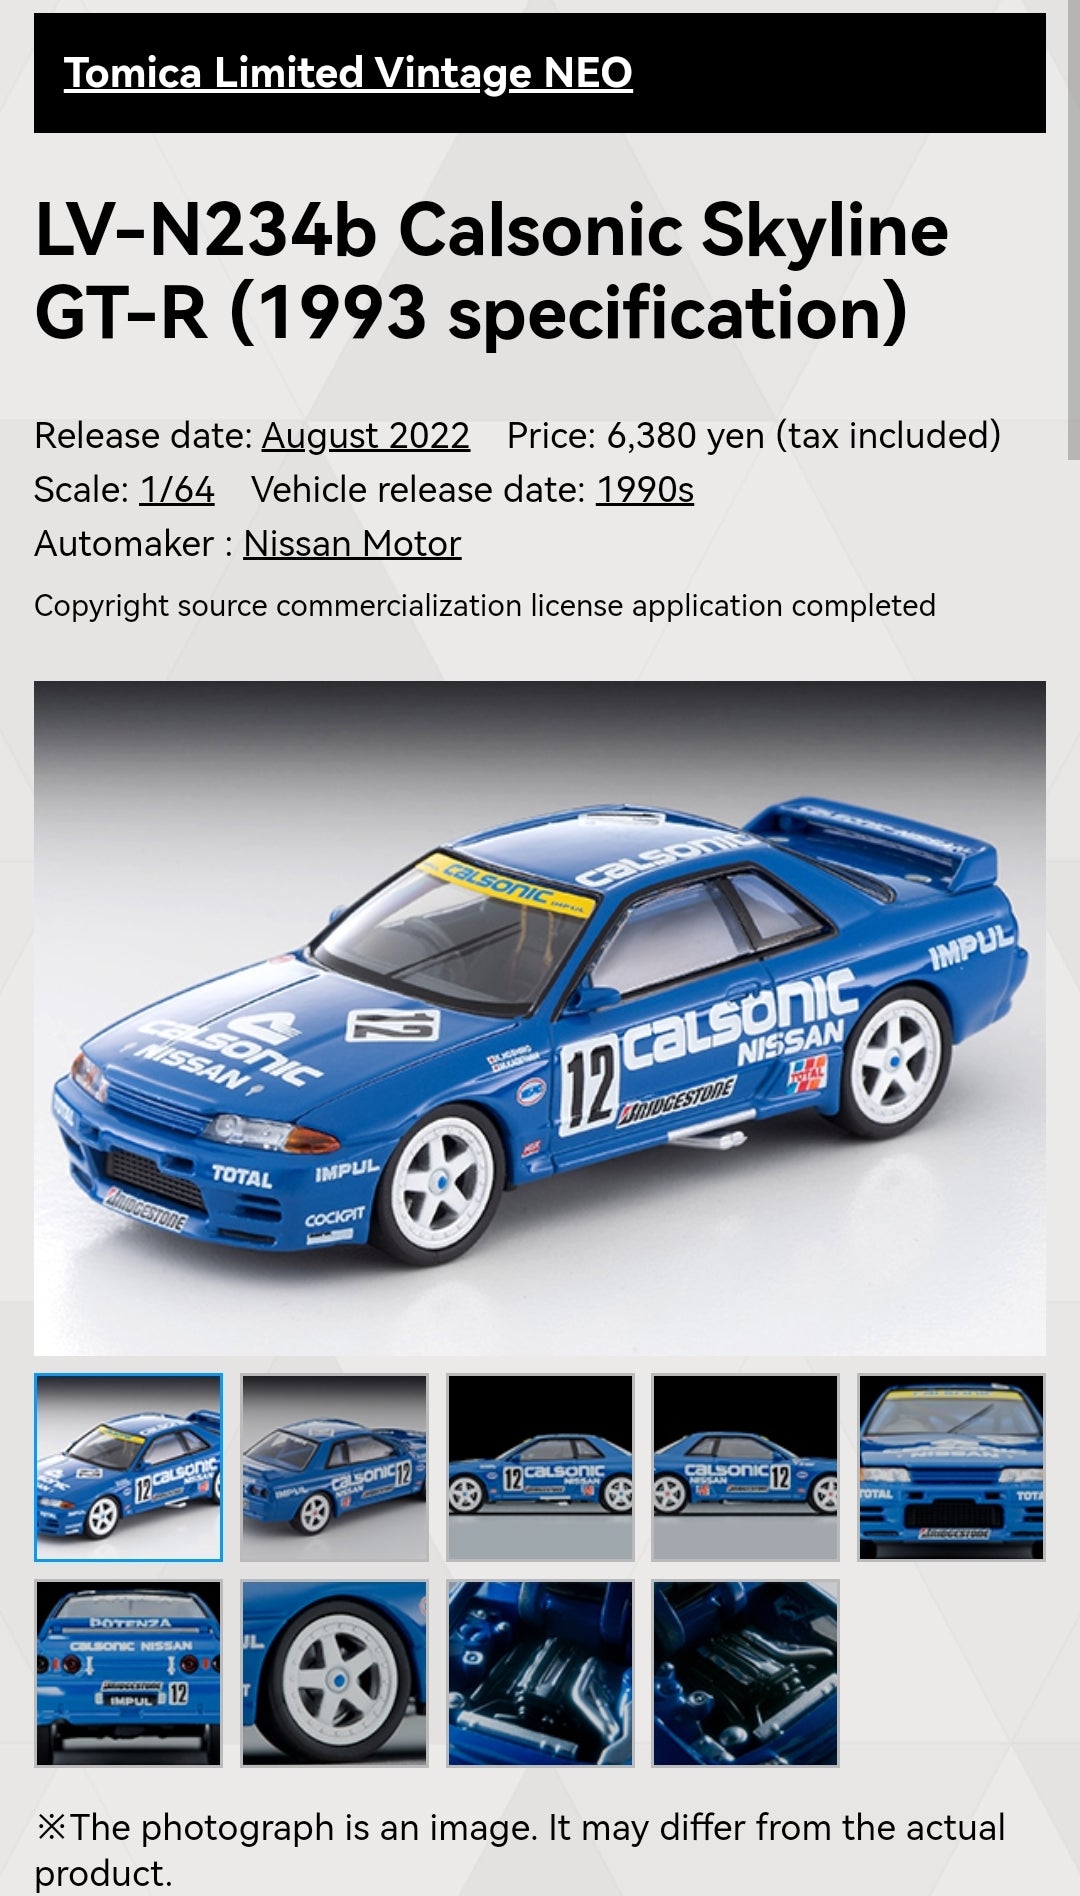 Tomica Limited Vintage Neo LV-N234b Calsonic Skyline GT-R (1993 specification)